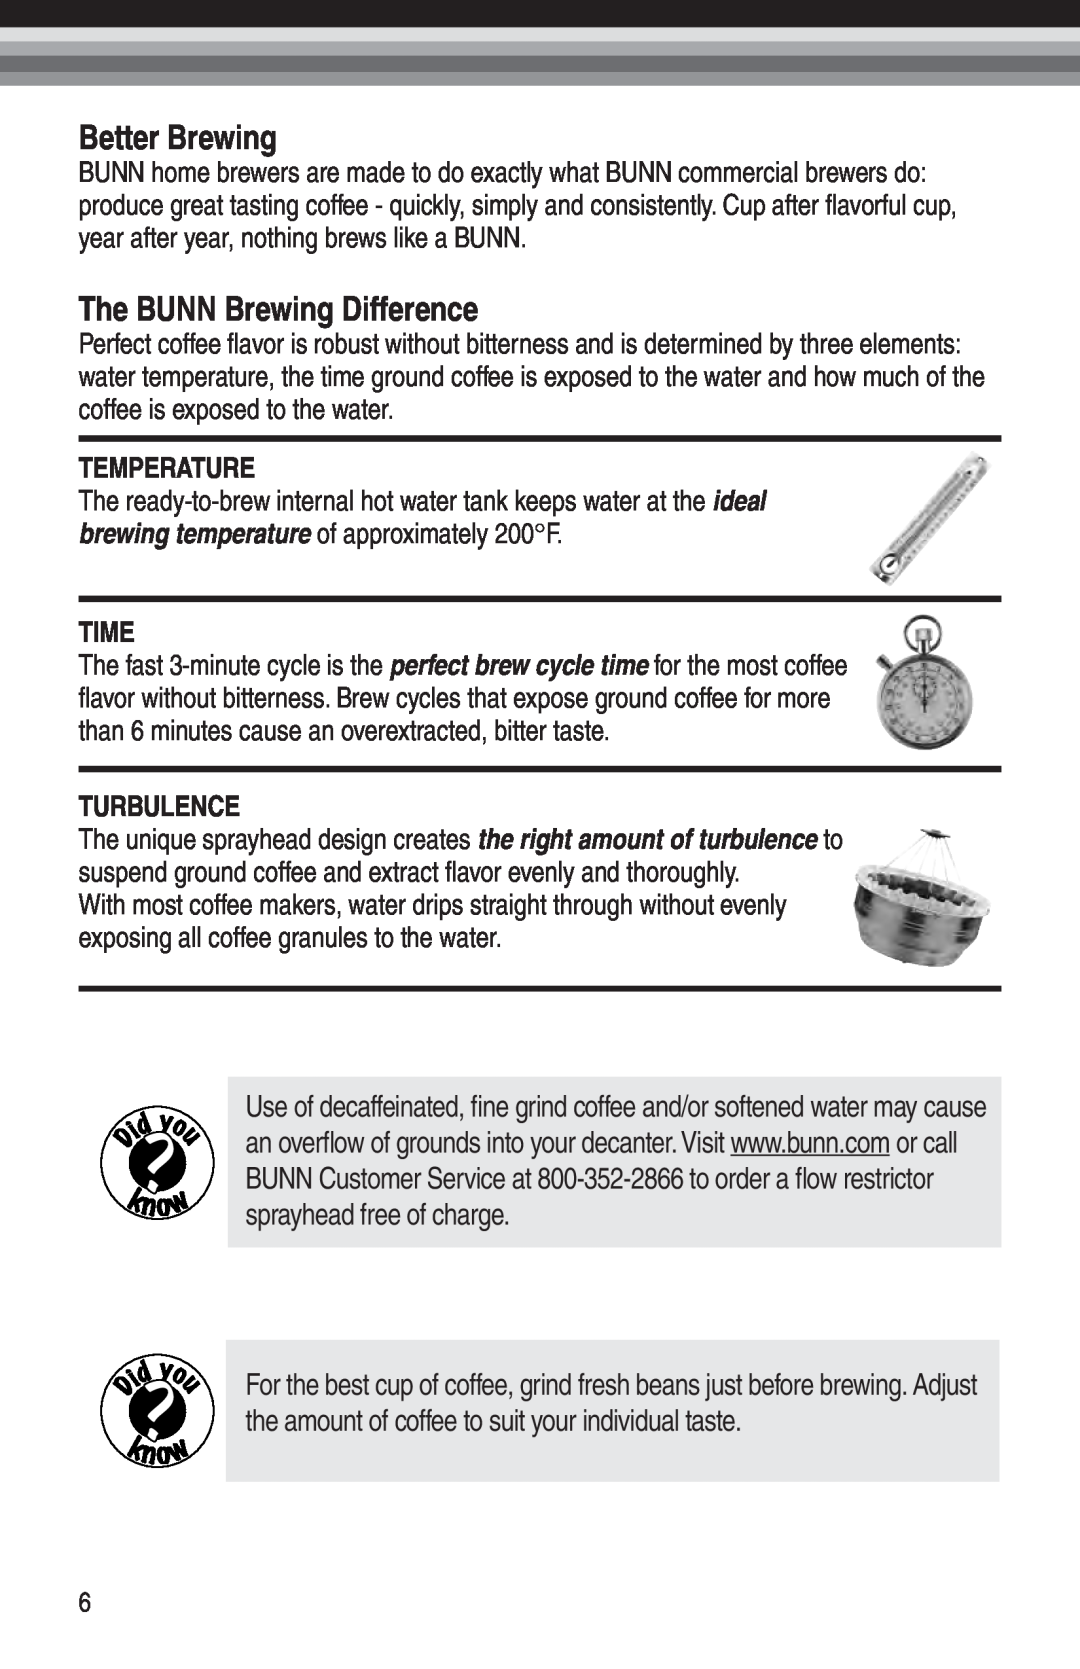 Bunn GRX manual Better Brewing, The BUNN Brewing Difference, Temperature, Time, Turbulence 